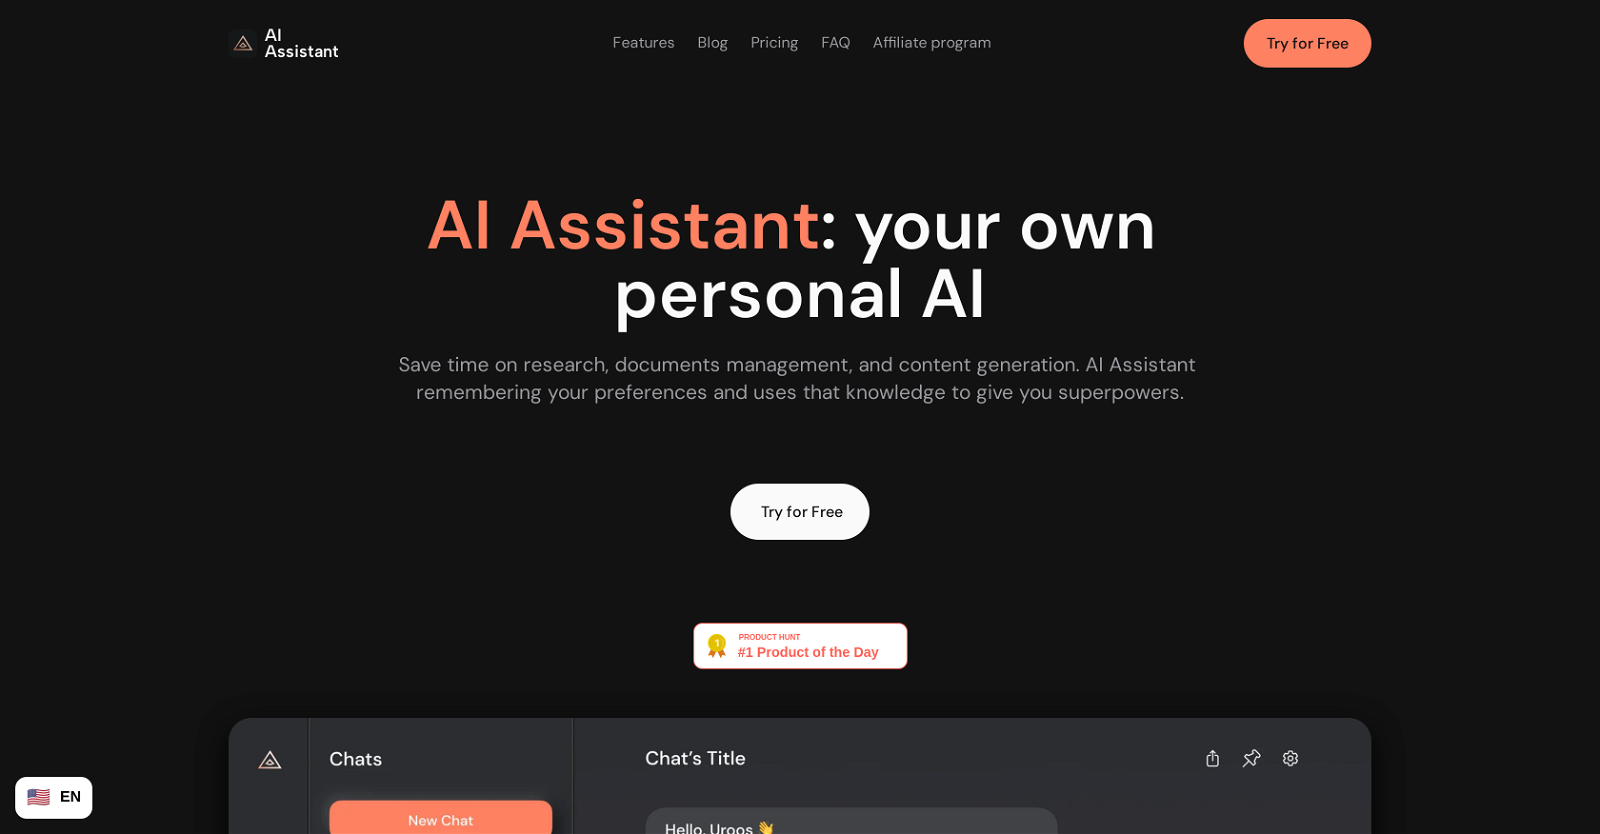 AIAssistant website